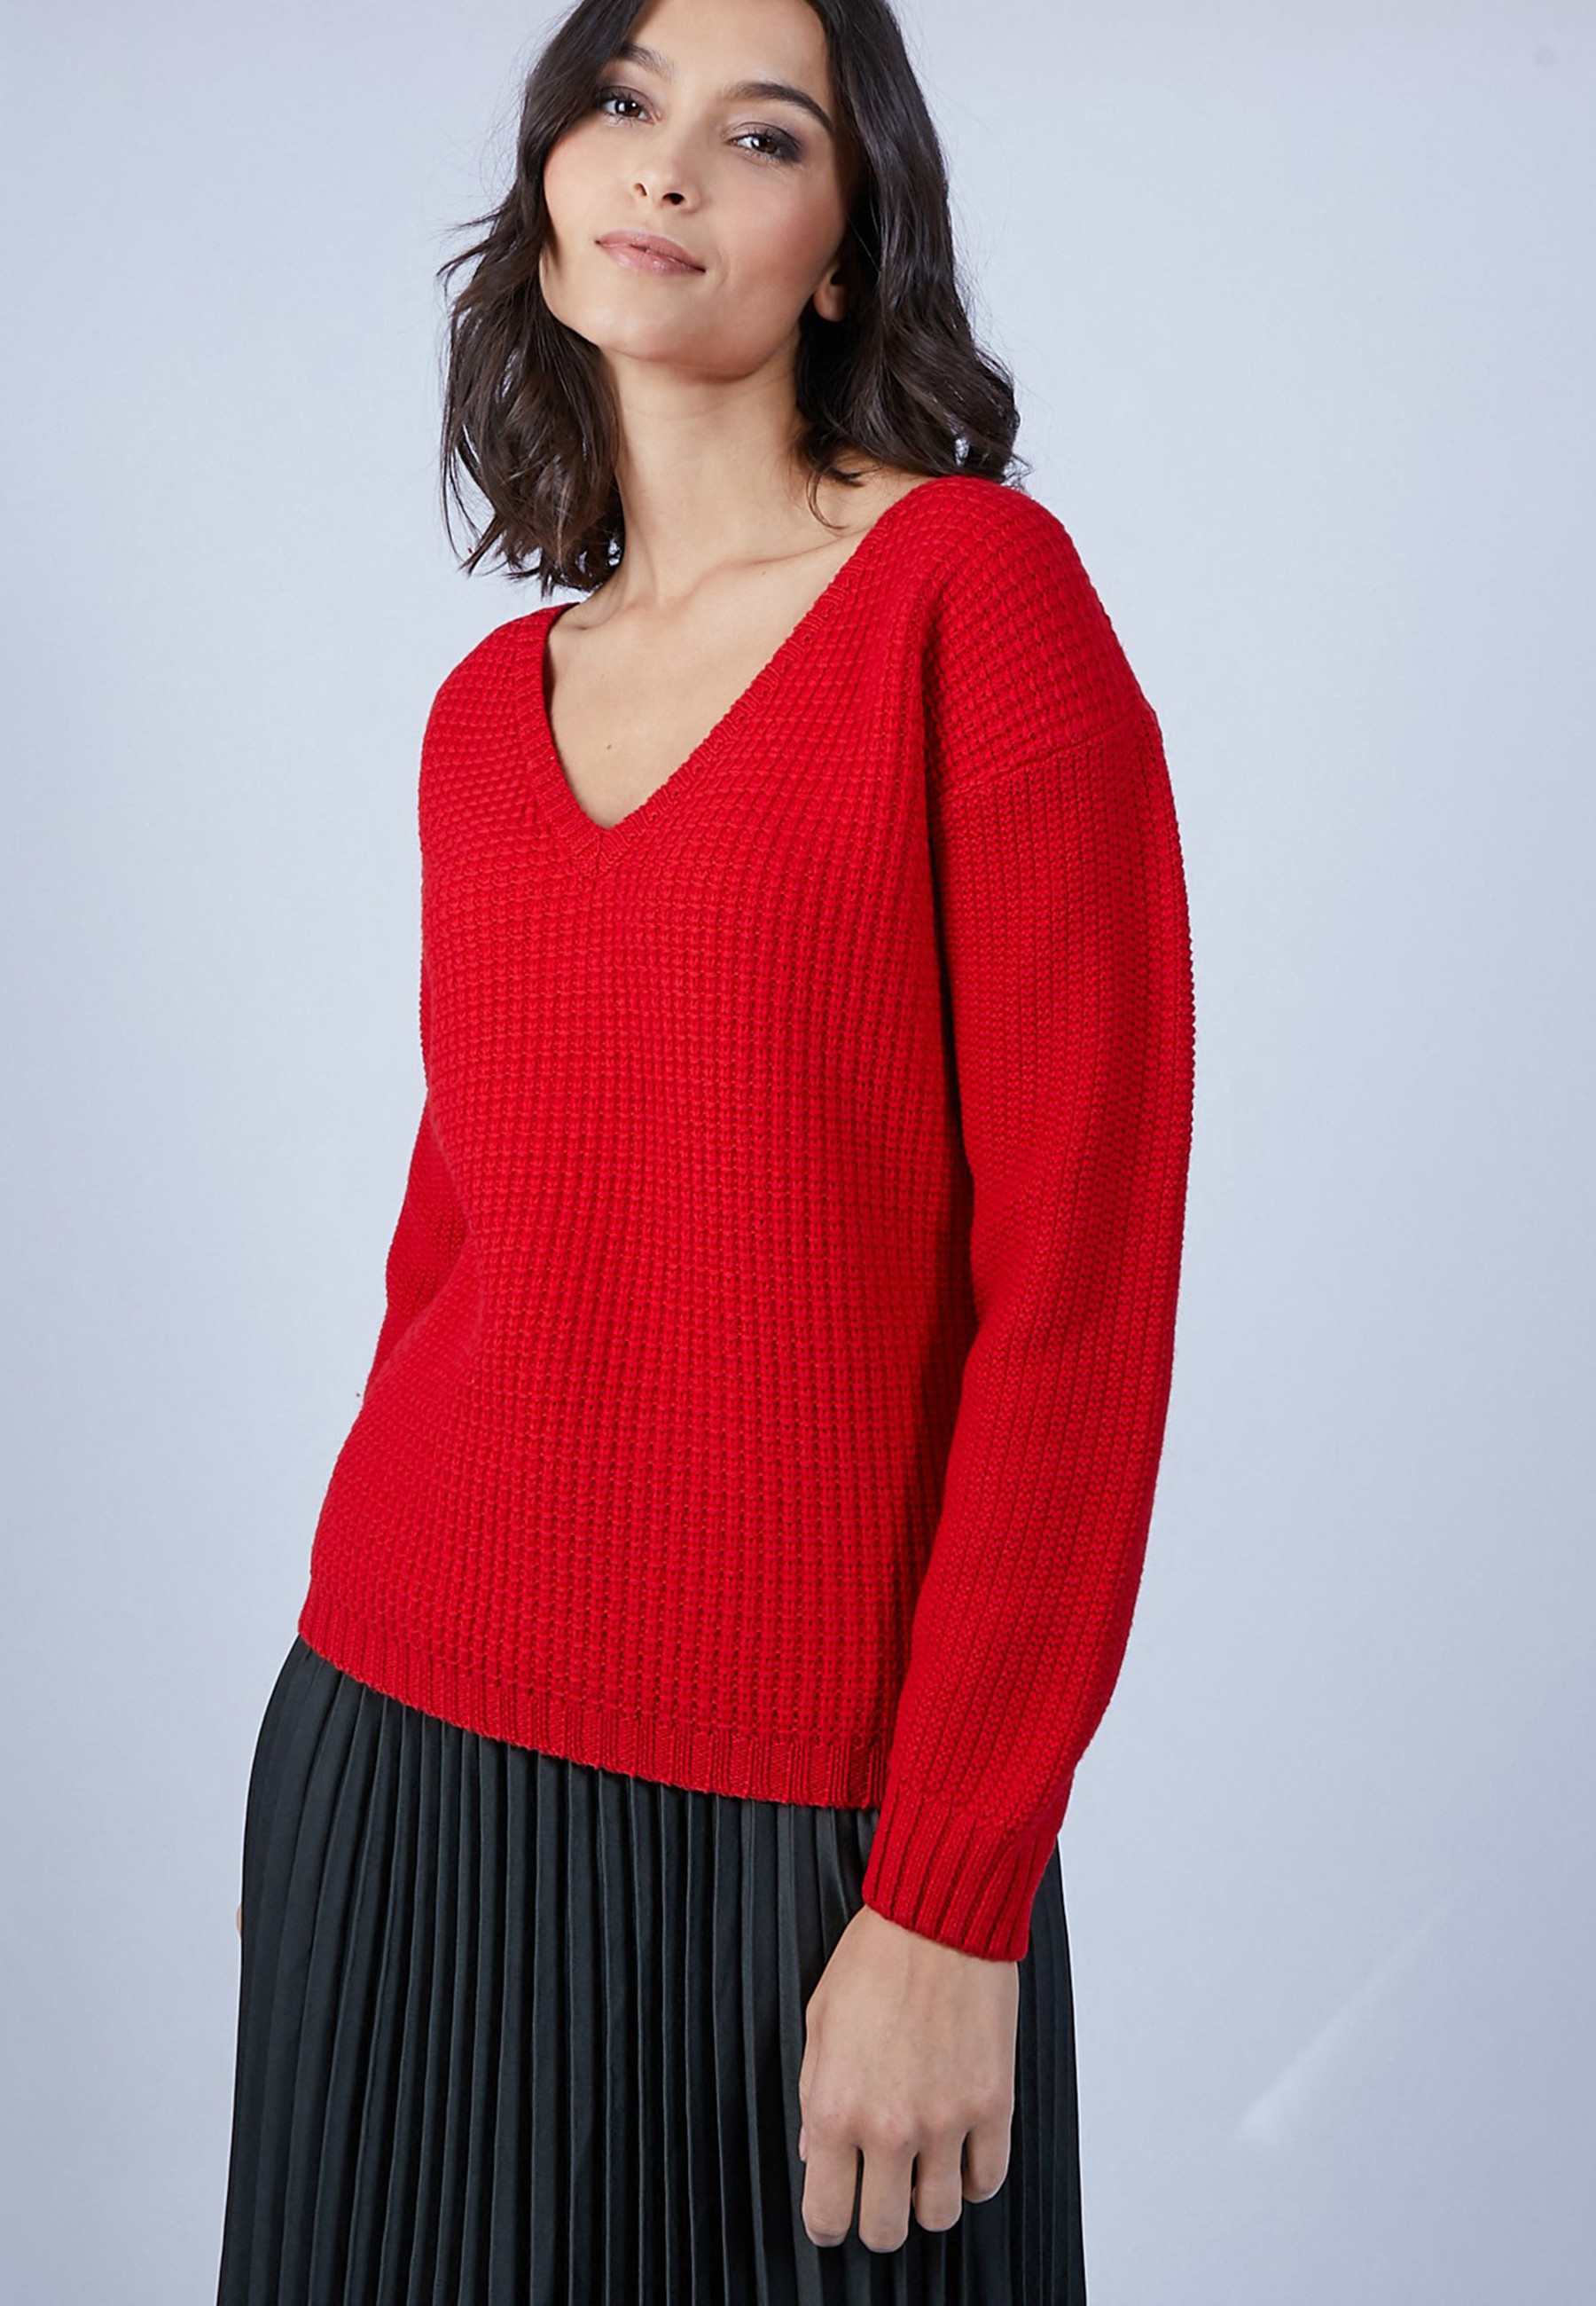 Tricot à la main WOOL pull oversize femme pull V col slouchy laine